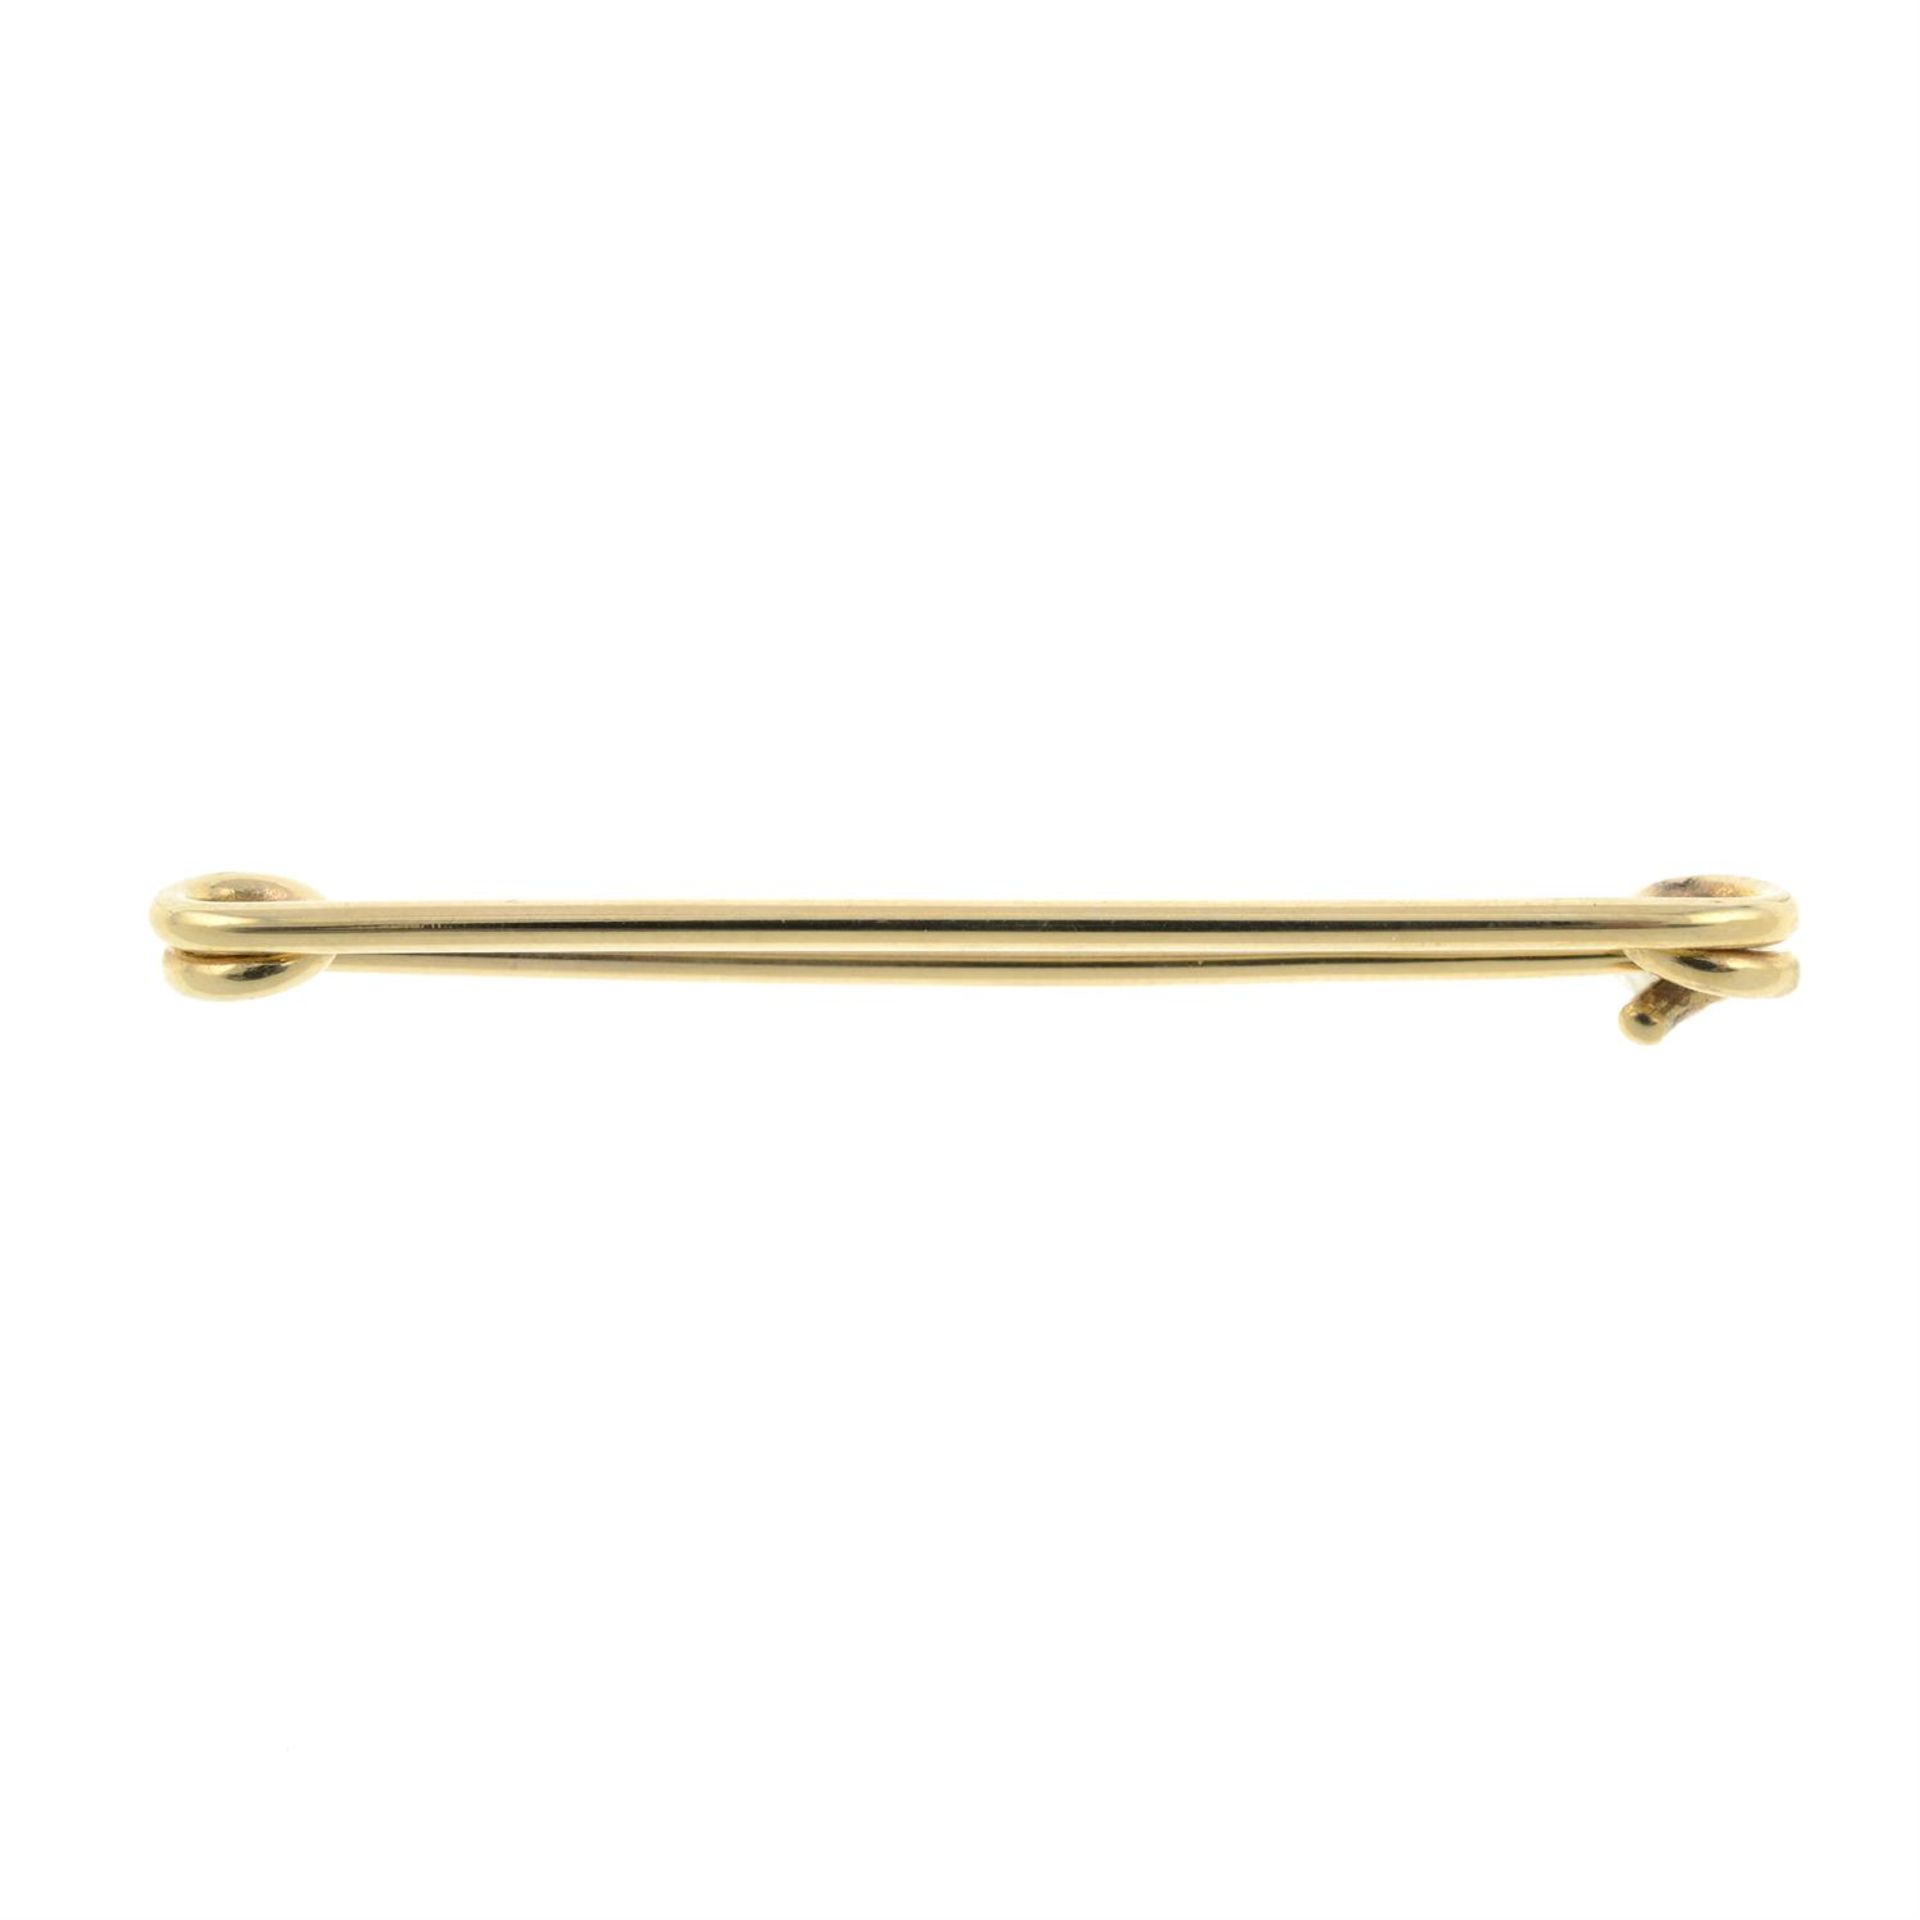 A 9ct gold safety pin.